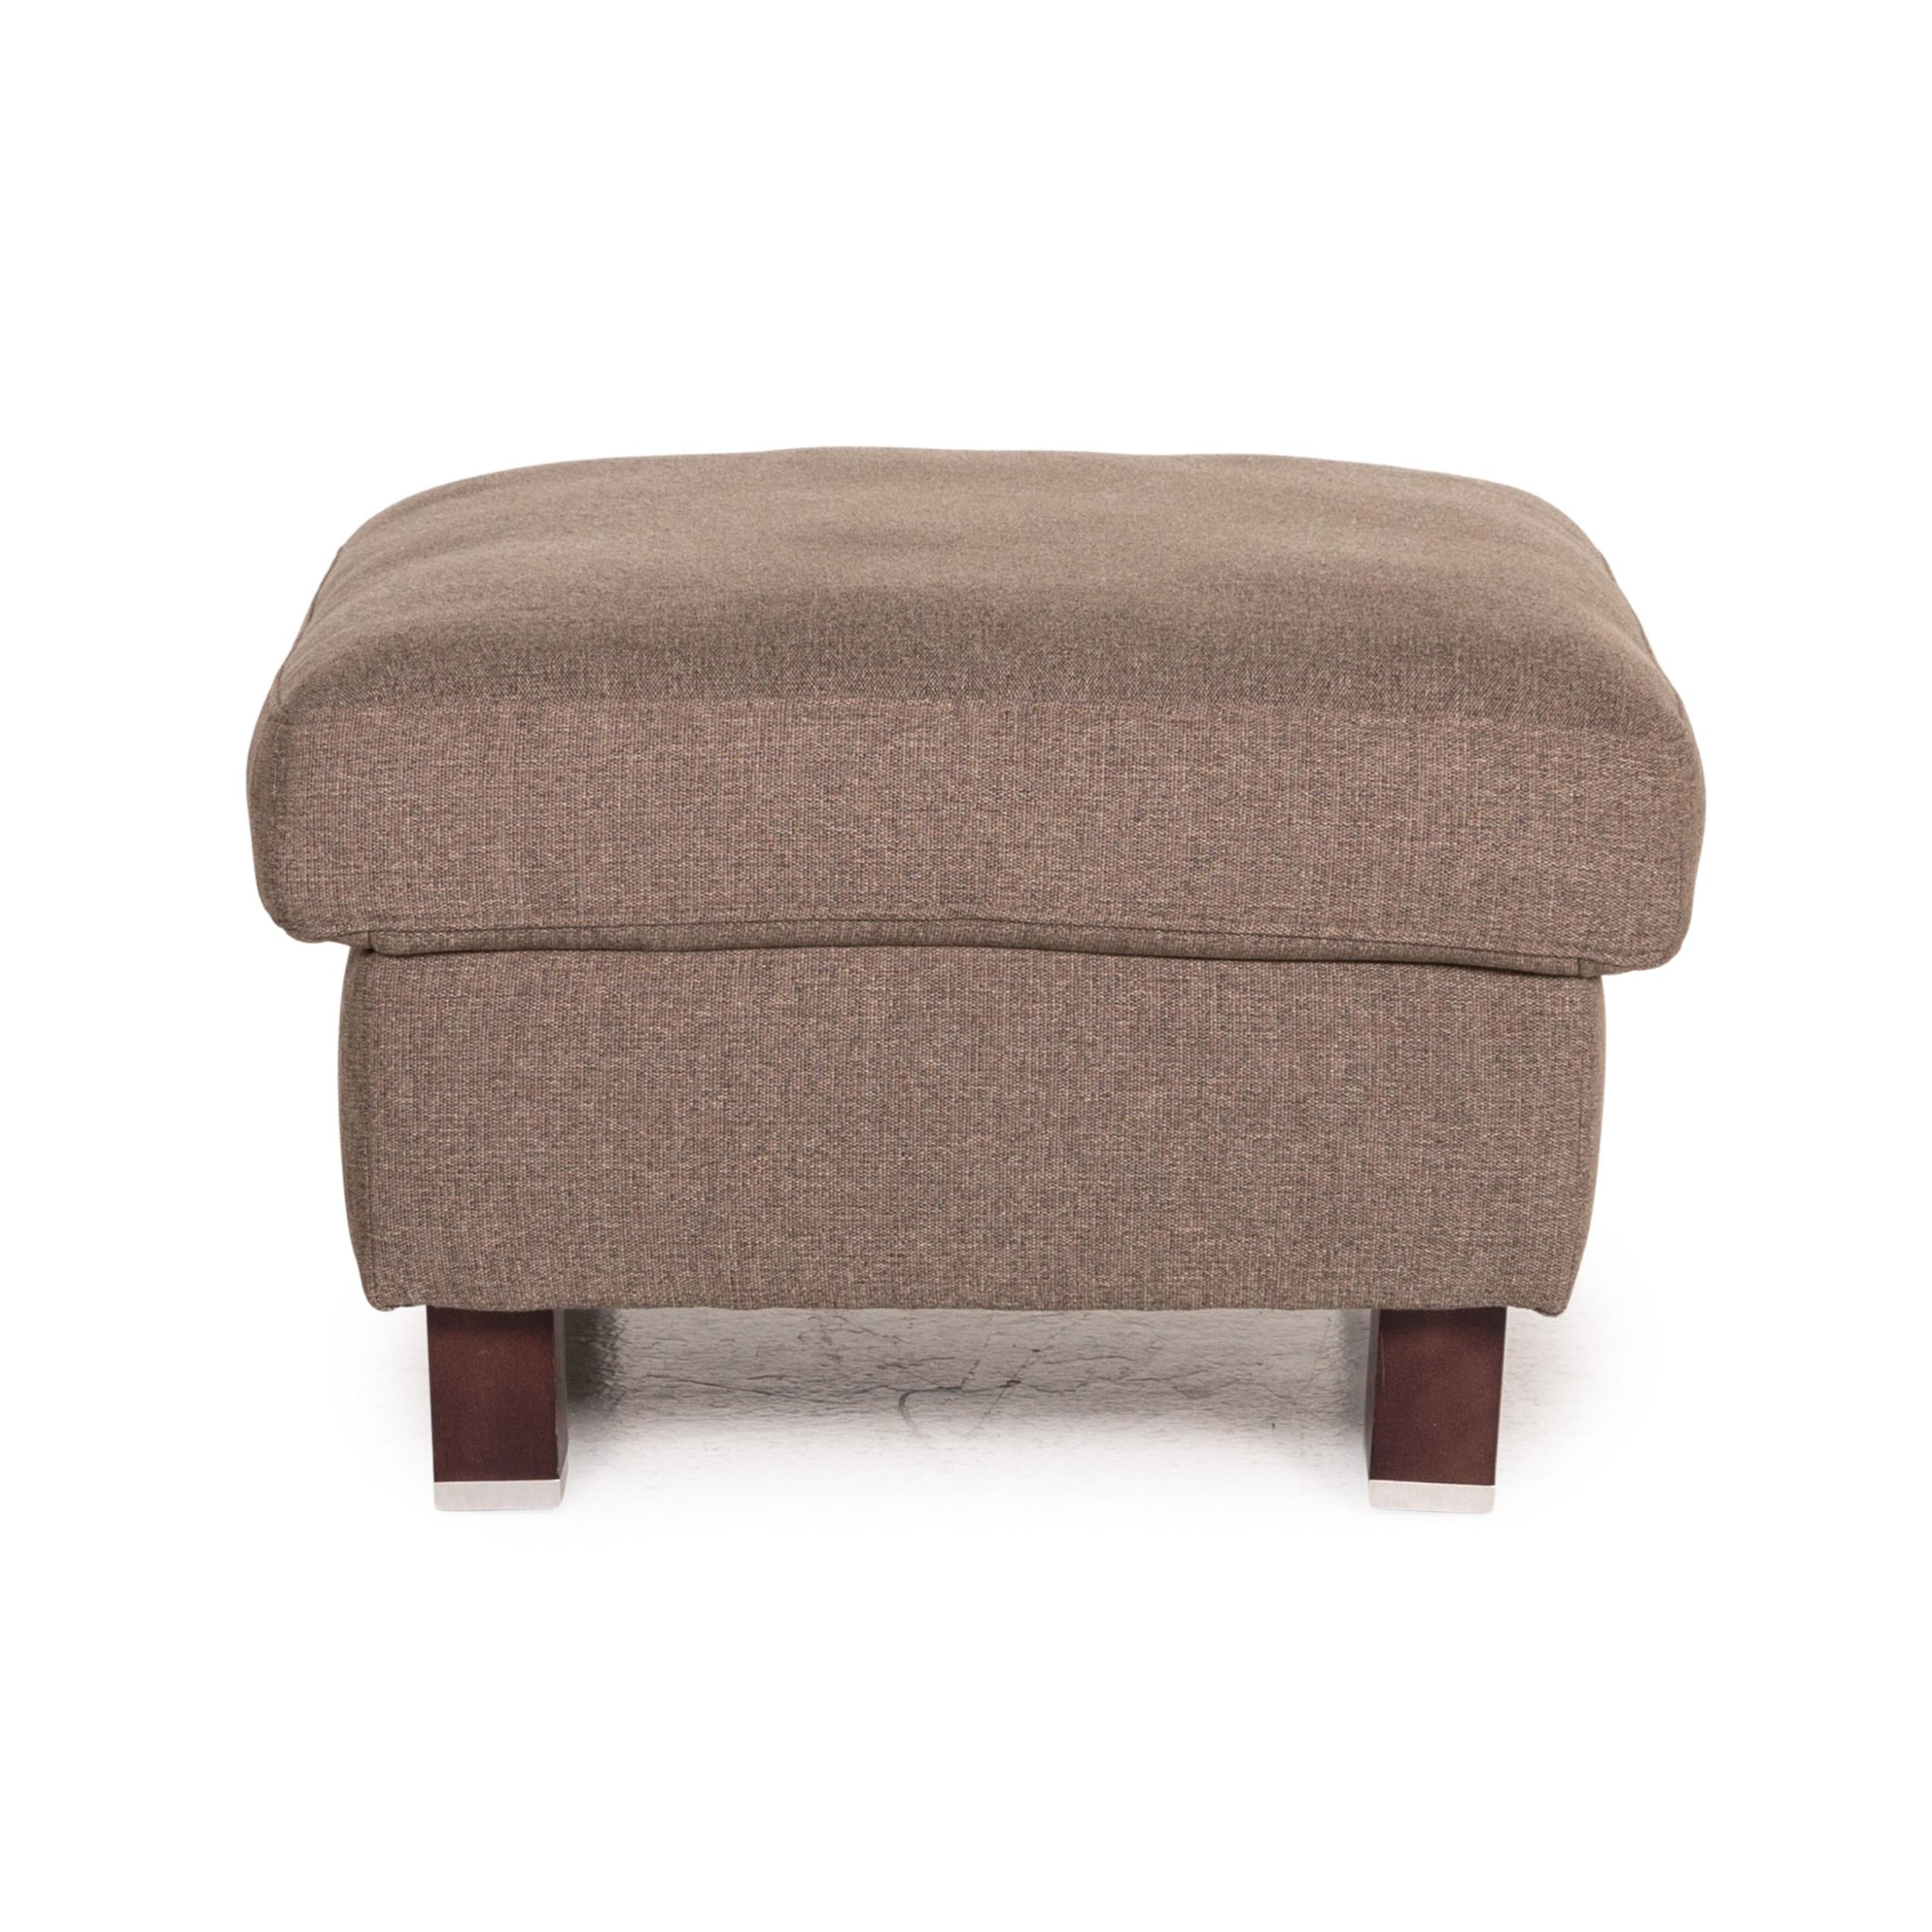 Ewald Schillig Fabric Stool Gray-Brown In Good Condition For Sale In Cologne, DE